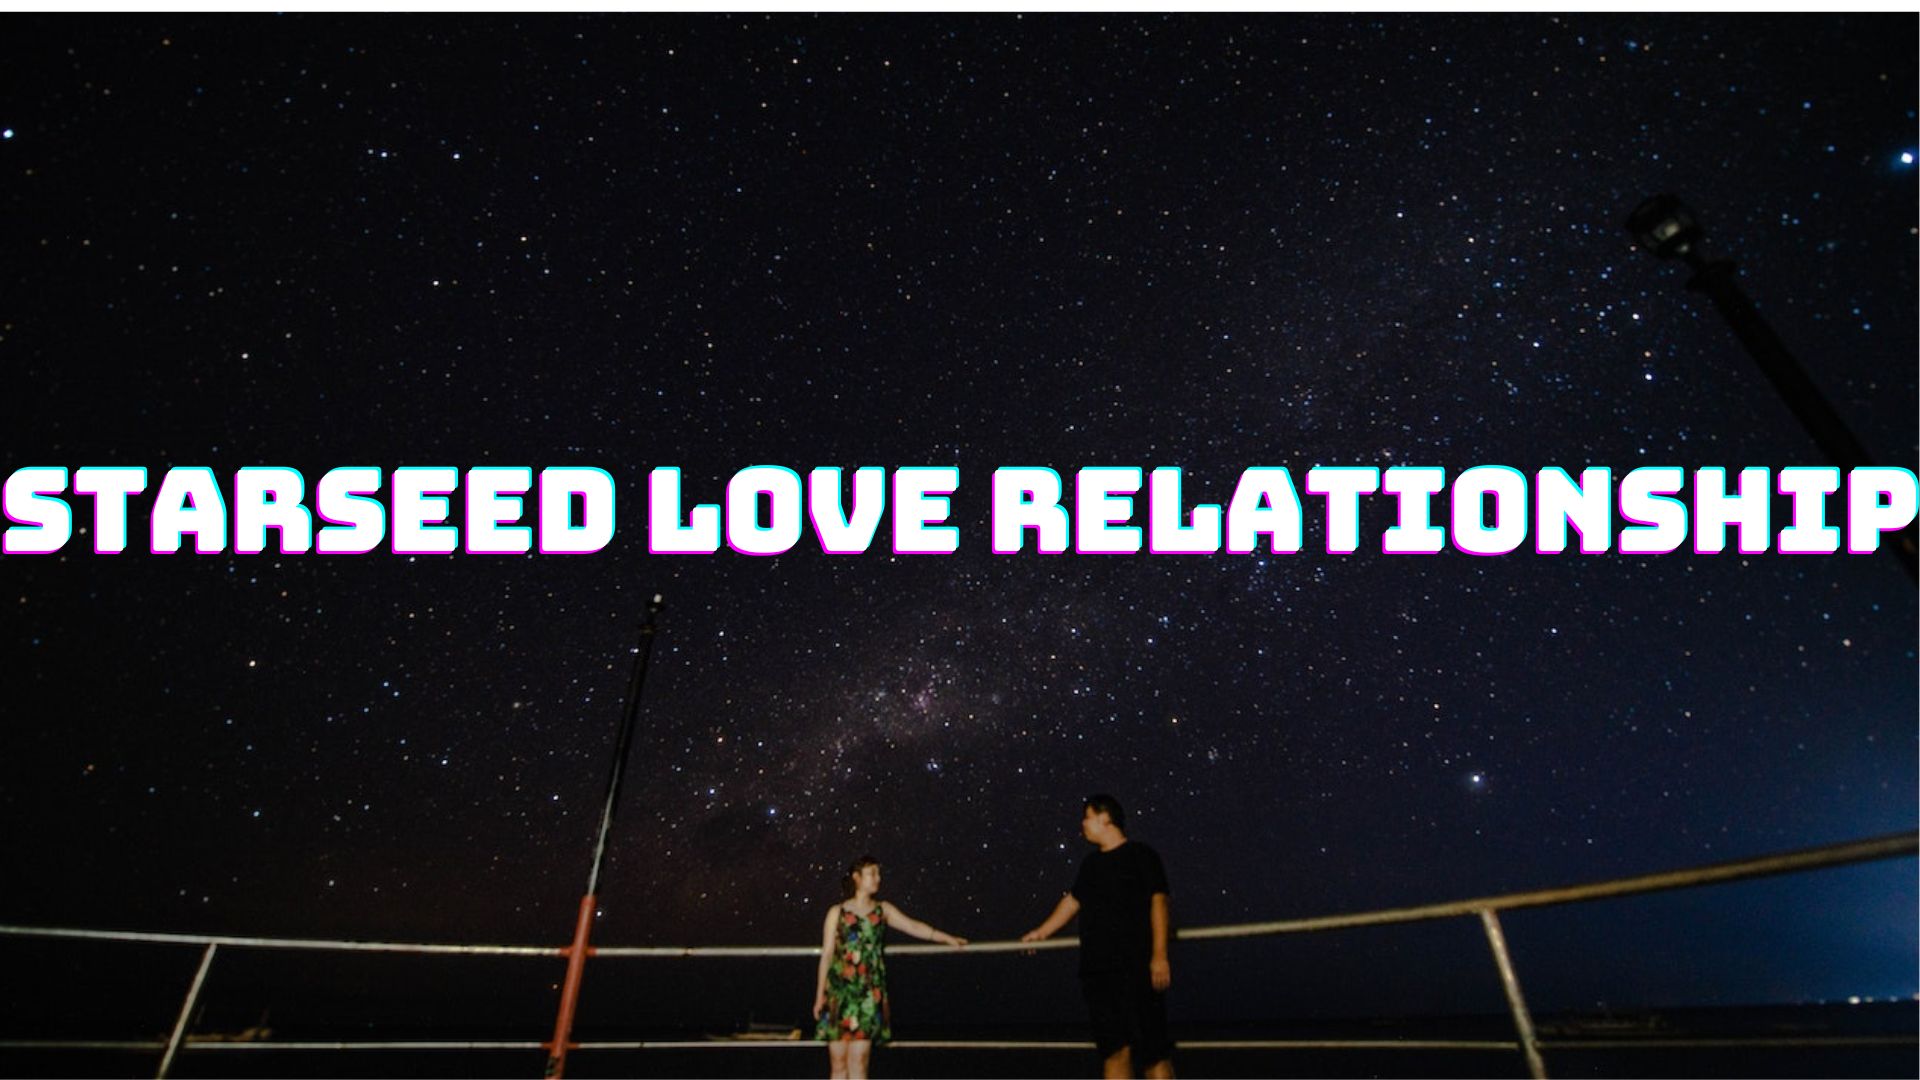 Starseed Love Relationship - Signs & Symptoms